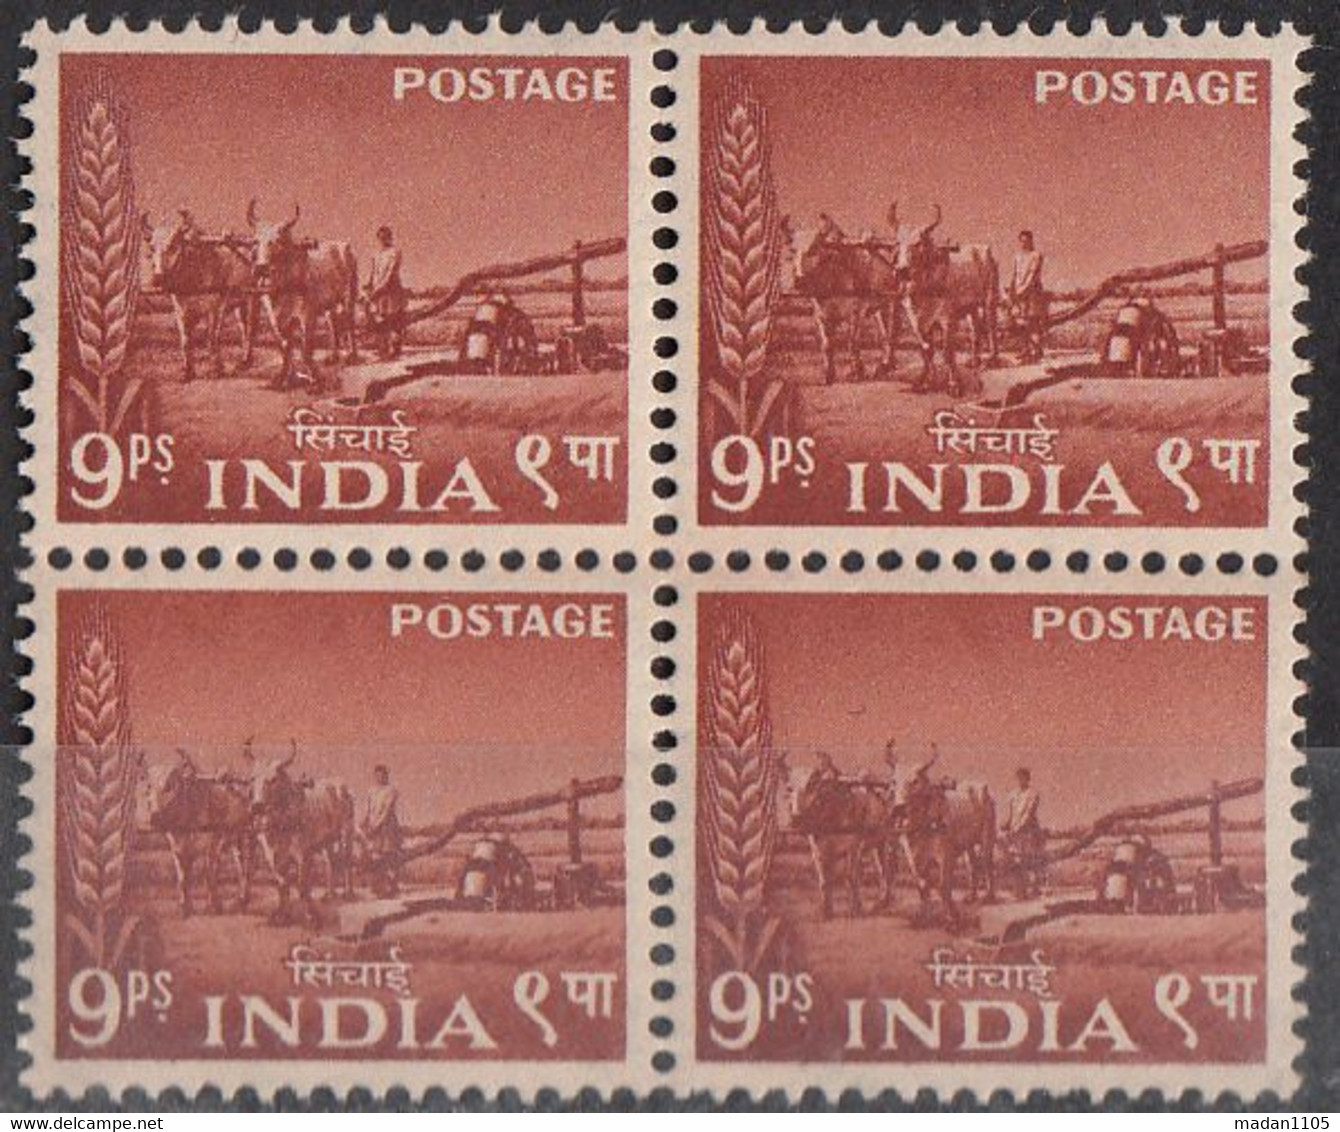 INDIA 1955  Five Year Plan (2nd Definitive Serie)  9 Ps Power Lifting Of Water, Bloc Of 4,  MNH (**) (Never Hinged) - Nuevos